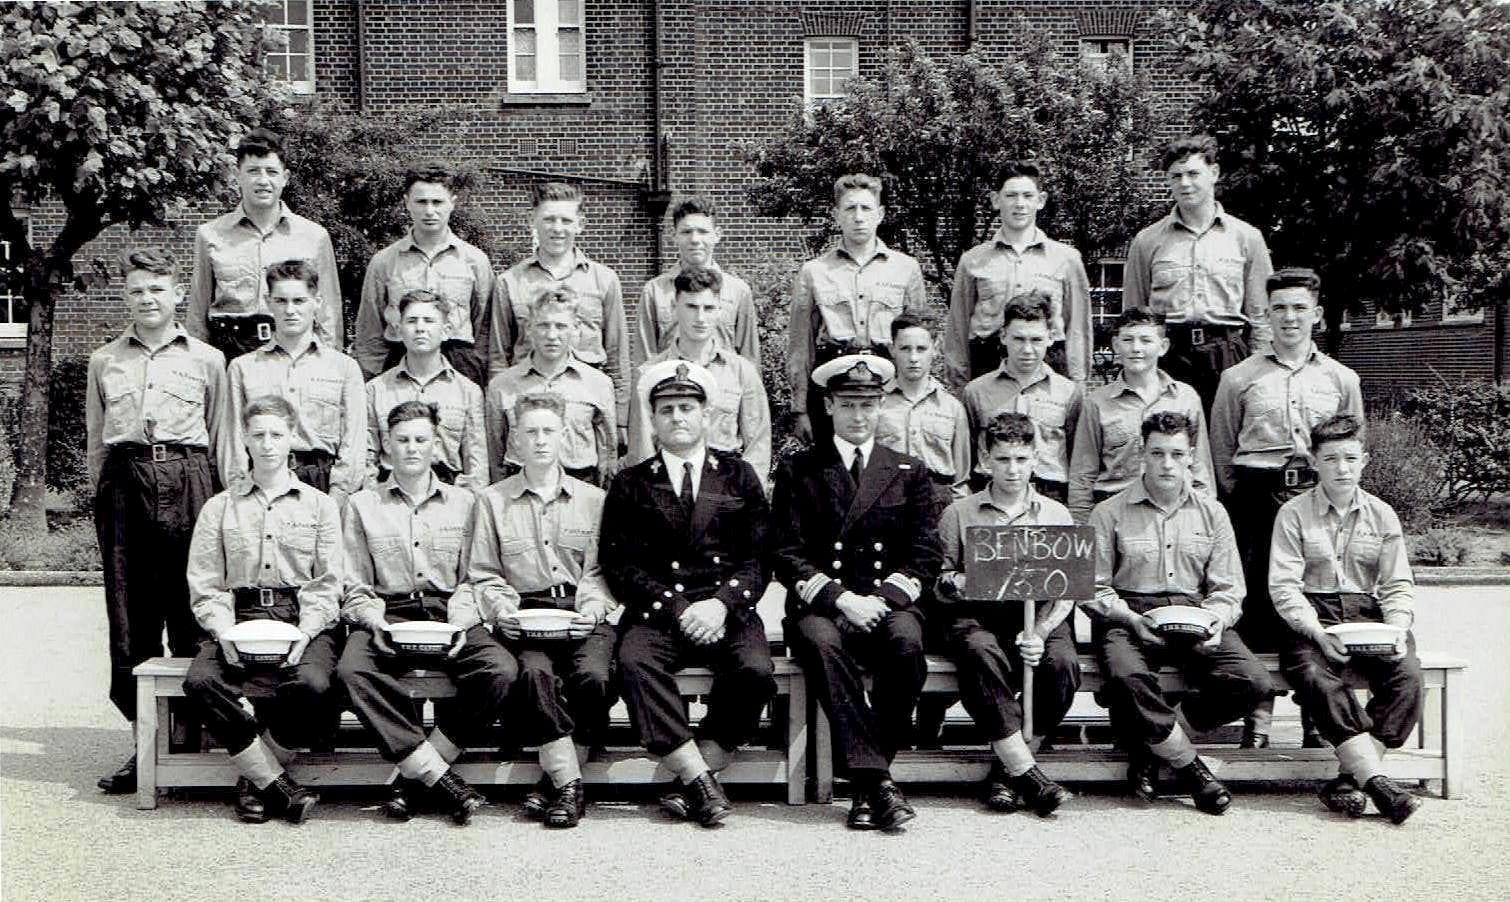 1963 - MALCOLM FANNON, BENBOW, 29 MESS, 150 CLASS, INSTR. CPO STOKER BYWATERS, SEE BELOW FOR OTHER NAMES.jpg